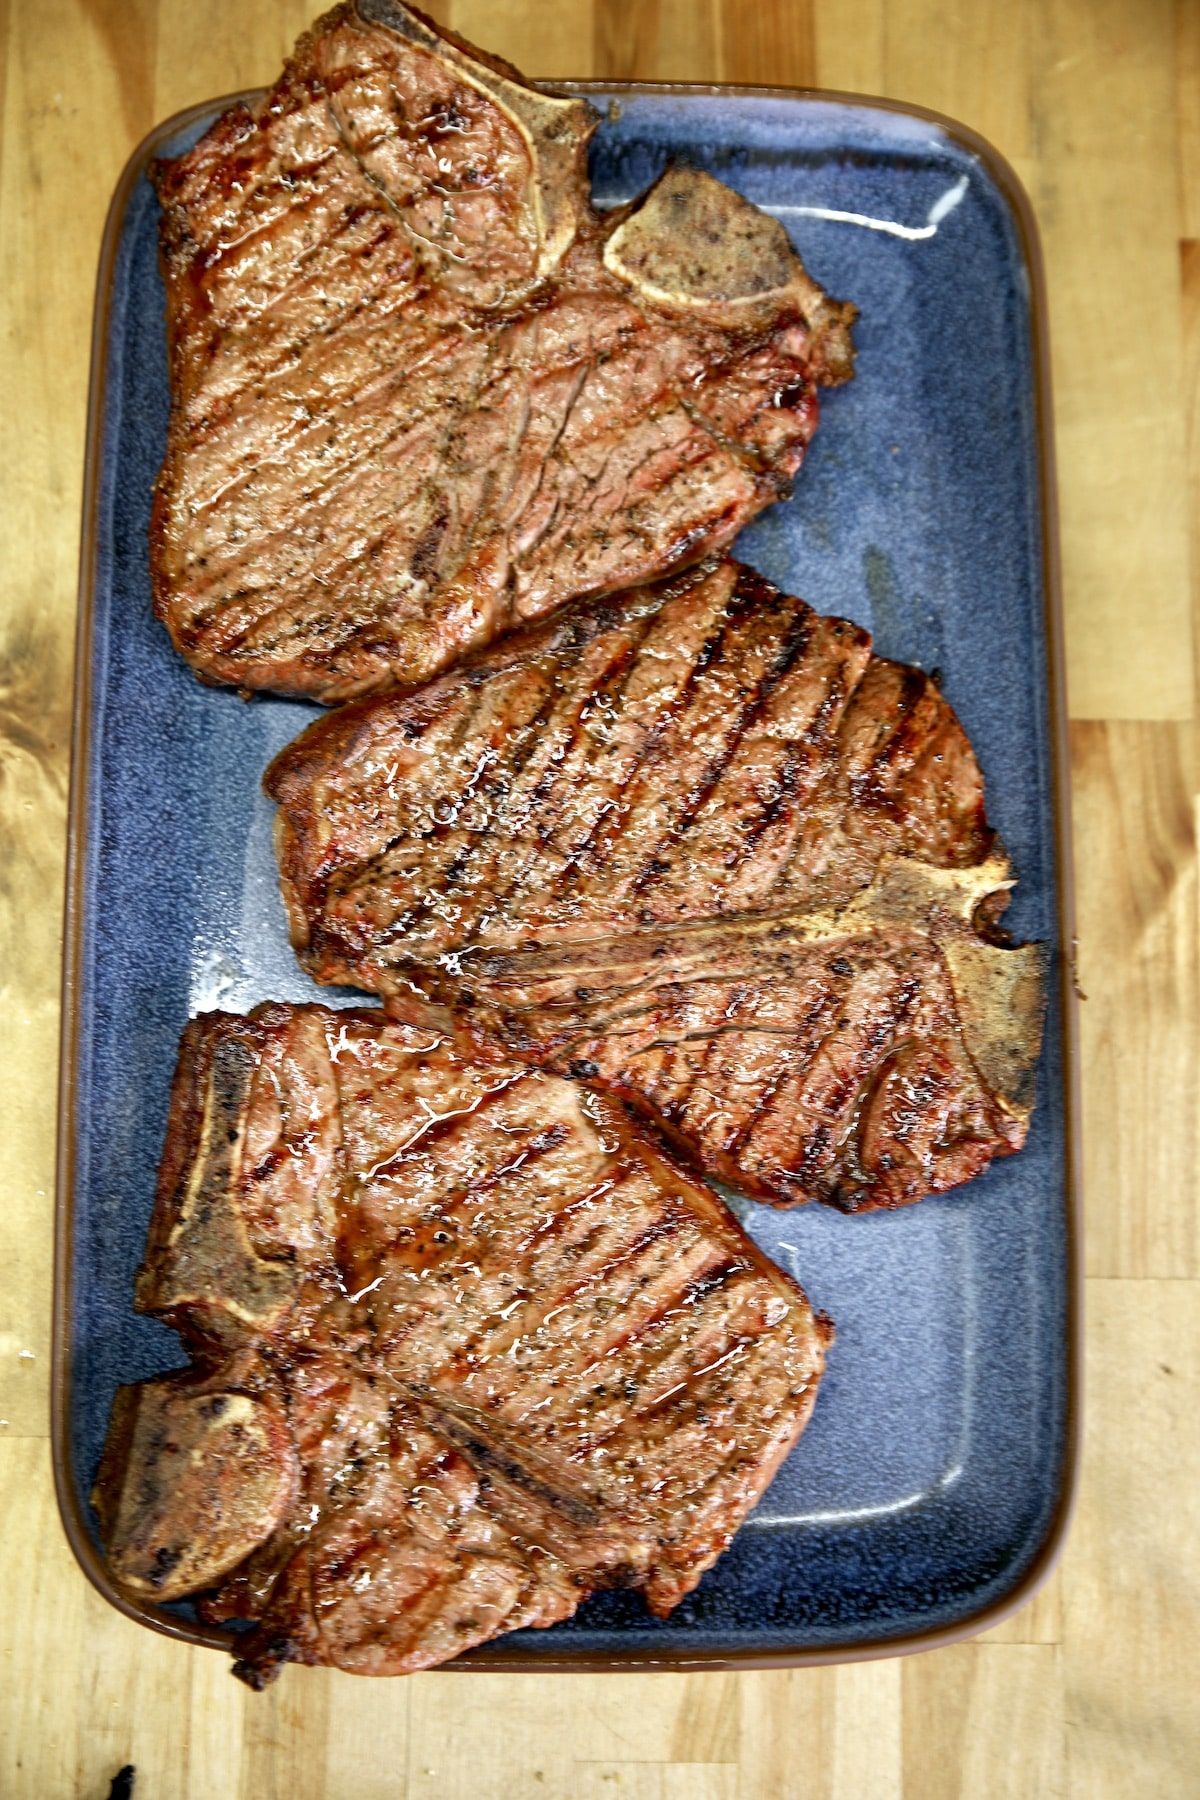 Platter with 3 grilled T-Bone Steaks.